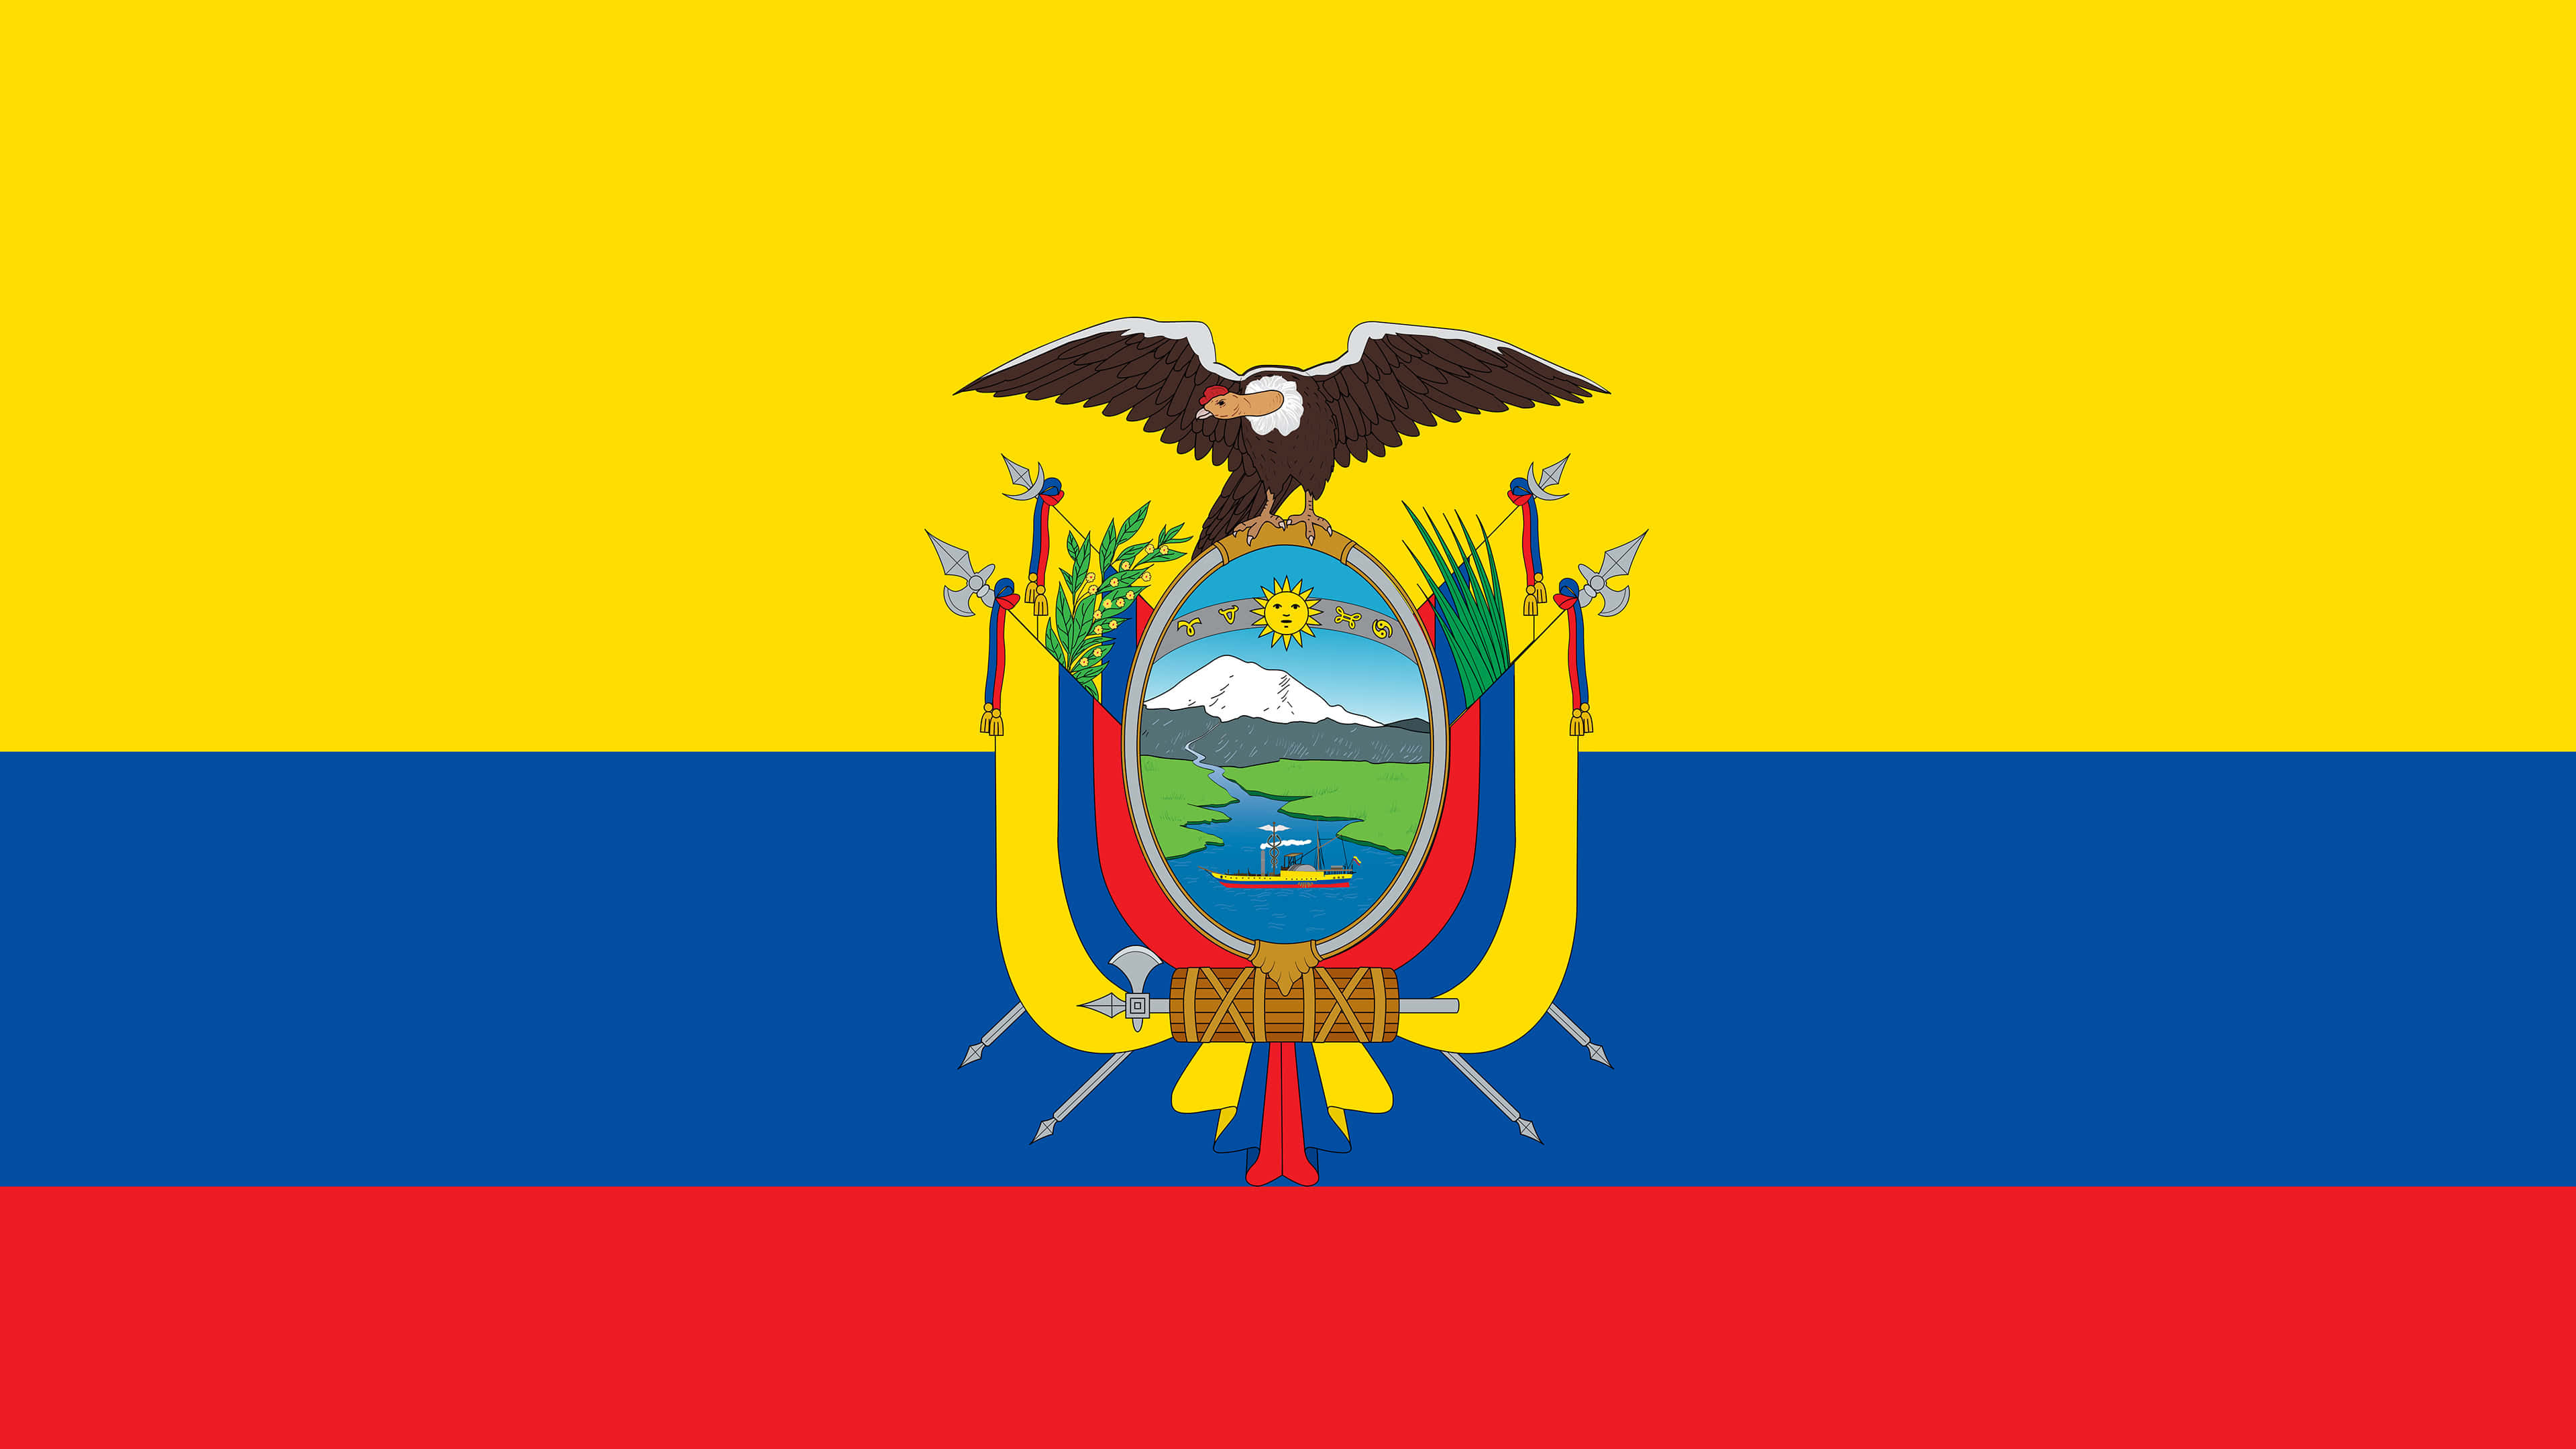 Ecuador: Flag, A country in northwestern South America, bordered by Colombia on the north, Peru on the east and south, and the Pacific Ocean on the west. 3840x2160 4K Wallpaper.